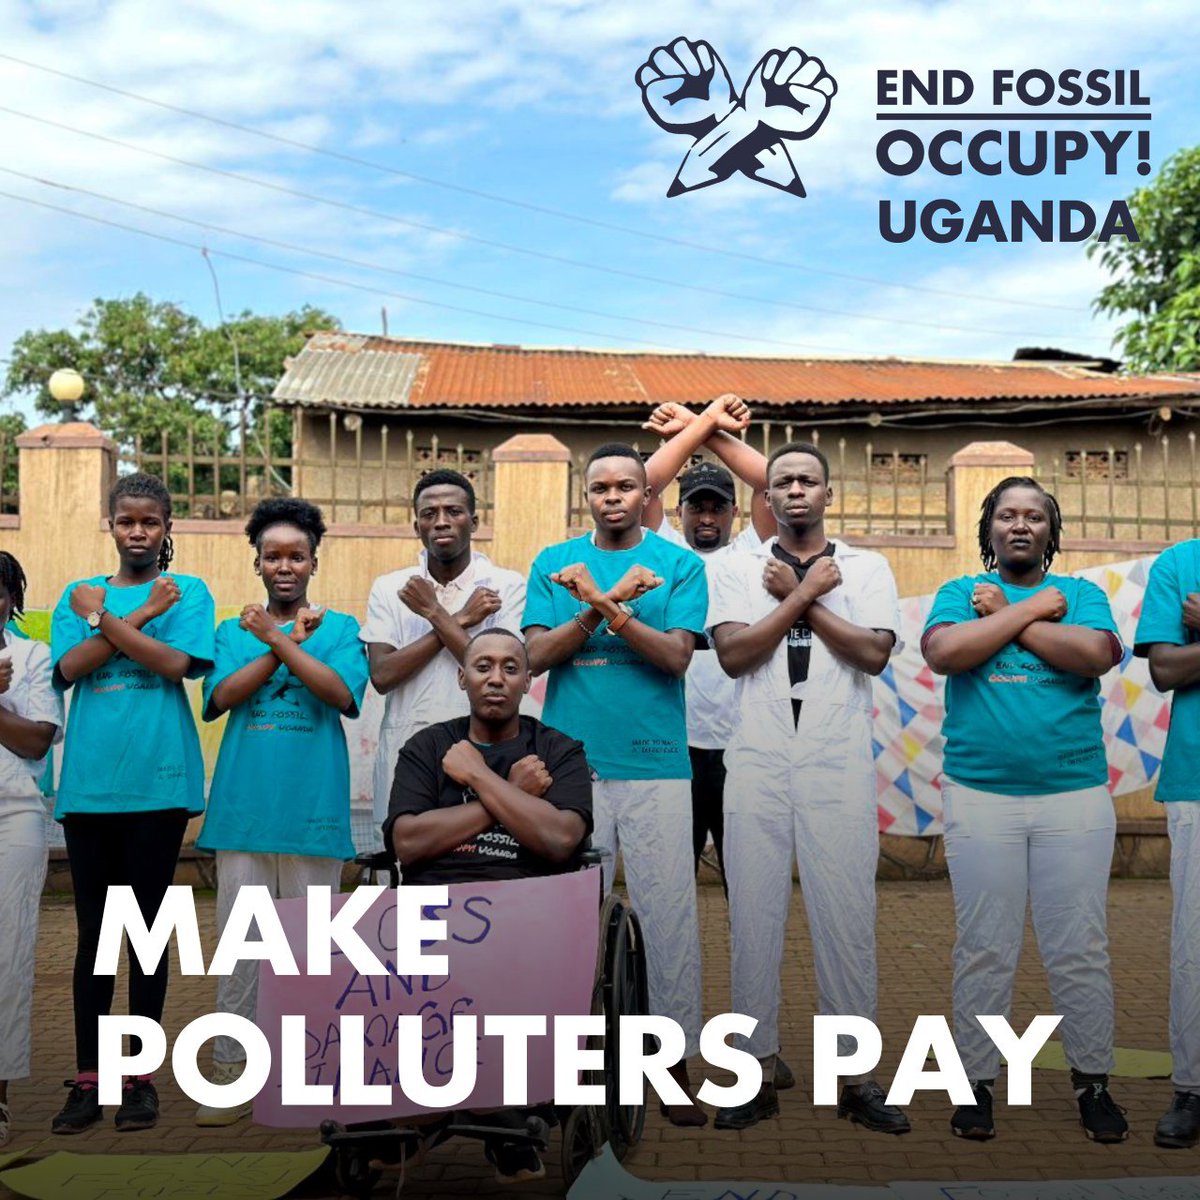 MAKE POLLUTERS PAY!!

#EndFossilFinance #EndFossilFuels #endfossil #NovemberWeOccupy